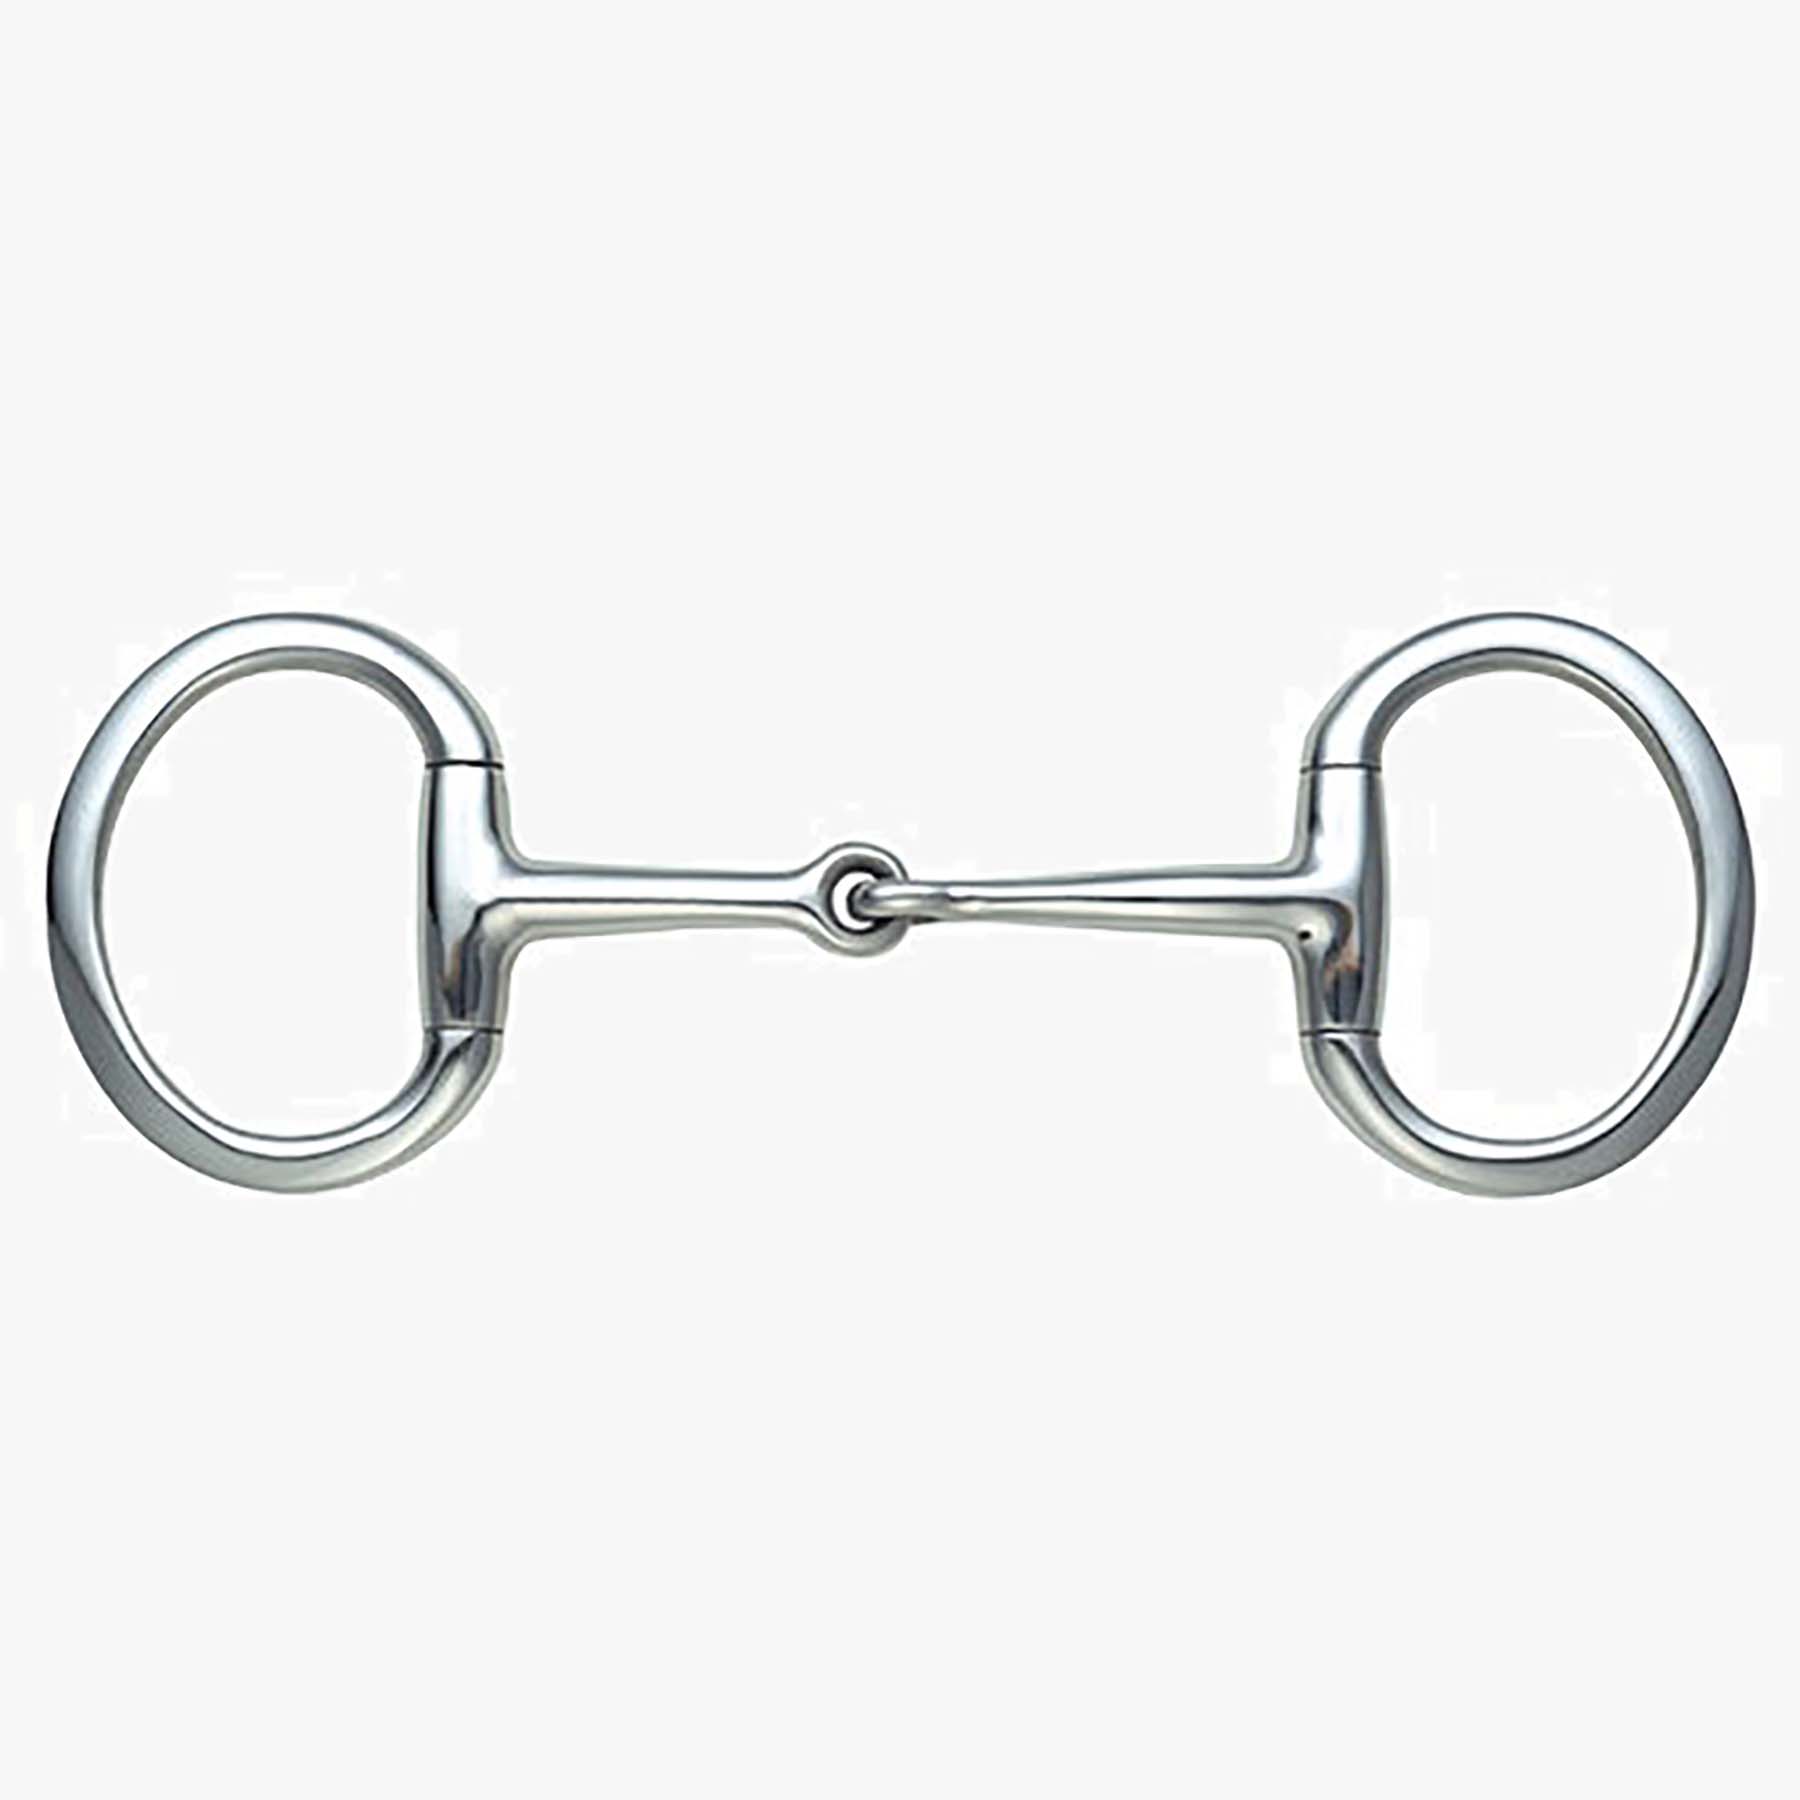 Shires Flat Ring Jointed Eggbutt Snaffle Bit